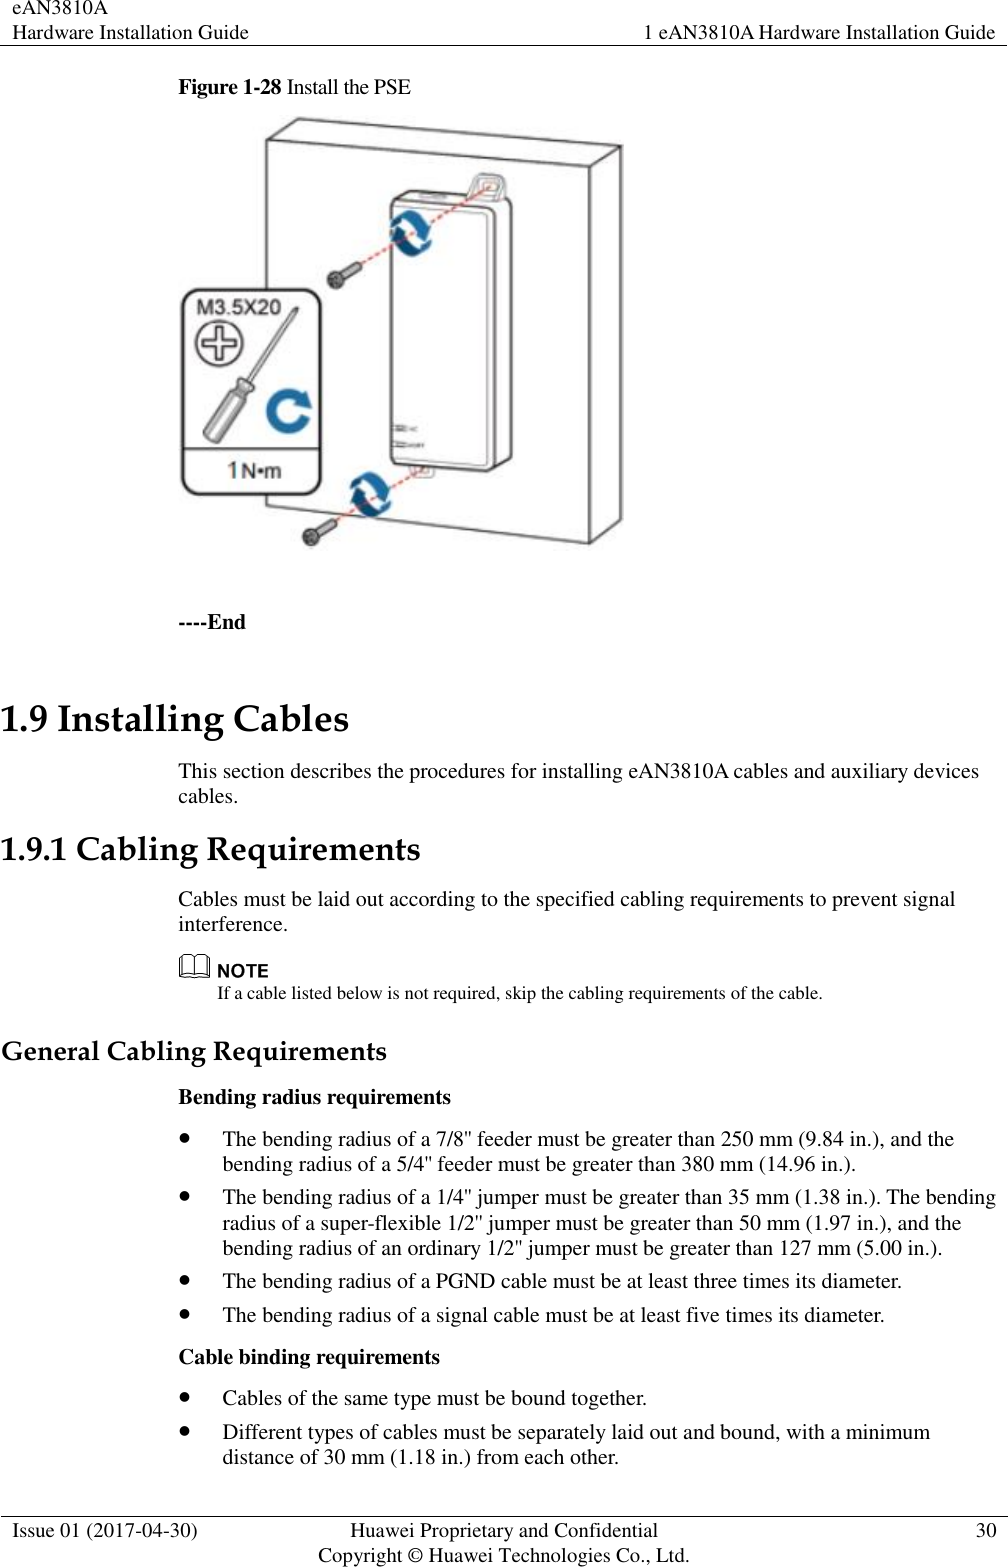 eAN3810A   Hardware Installation Guide 1 eAN3810A Hardware Installation Guide  Issue 01 (2017-04-30) Huawei Proprietary and Confidential                                     Copyright © Huawei Technologies Co., Ltd. 30  Figure 1-28 Install the PSE   ----End 1.9 Installing Cables This section describes the procedures for installing eAN3810A cables and auxiliary devices cables. 1.9.1 Cabling Requirements Cables must be laid out according to the specified cabling requirements to prevent signal interference.  If a cable listed below is not required, skip the cabling requirements of the cable. General Cabling Requirements Bending radius requirements  The bending radius of a 7/8&apos;&apos; feeder must be greater than 250 mm (9.84 in.), and the bending radius of a 5/4&apos;&apos; feeder must be greater than 380 mm (14.96 in.).  The bending radius of a 1/4&apos;&apos; jumper must be greater than 35 mm (1.38 in.). The bending radius of a super-flexible 1/2&apos;&apos; jumper must be greater than 50 mm (1.97 in.), and the bending radius of an ordinary 1/2&apos;&apos; jumper must be greater than 127 mm (5.00 in.).  The bending radius of a PGND cable must be at least three times its diameter.  The bending radius of a signal cable must be at least five times its diameter. Cable binding requirements  Cables of the same type must be bound together.  Different types of cables must be separately laid out and bound, with a minimum distance of 30 mm (1.18 in.) from each other. 